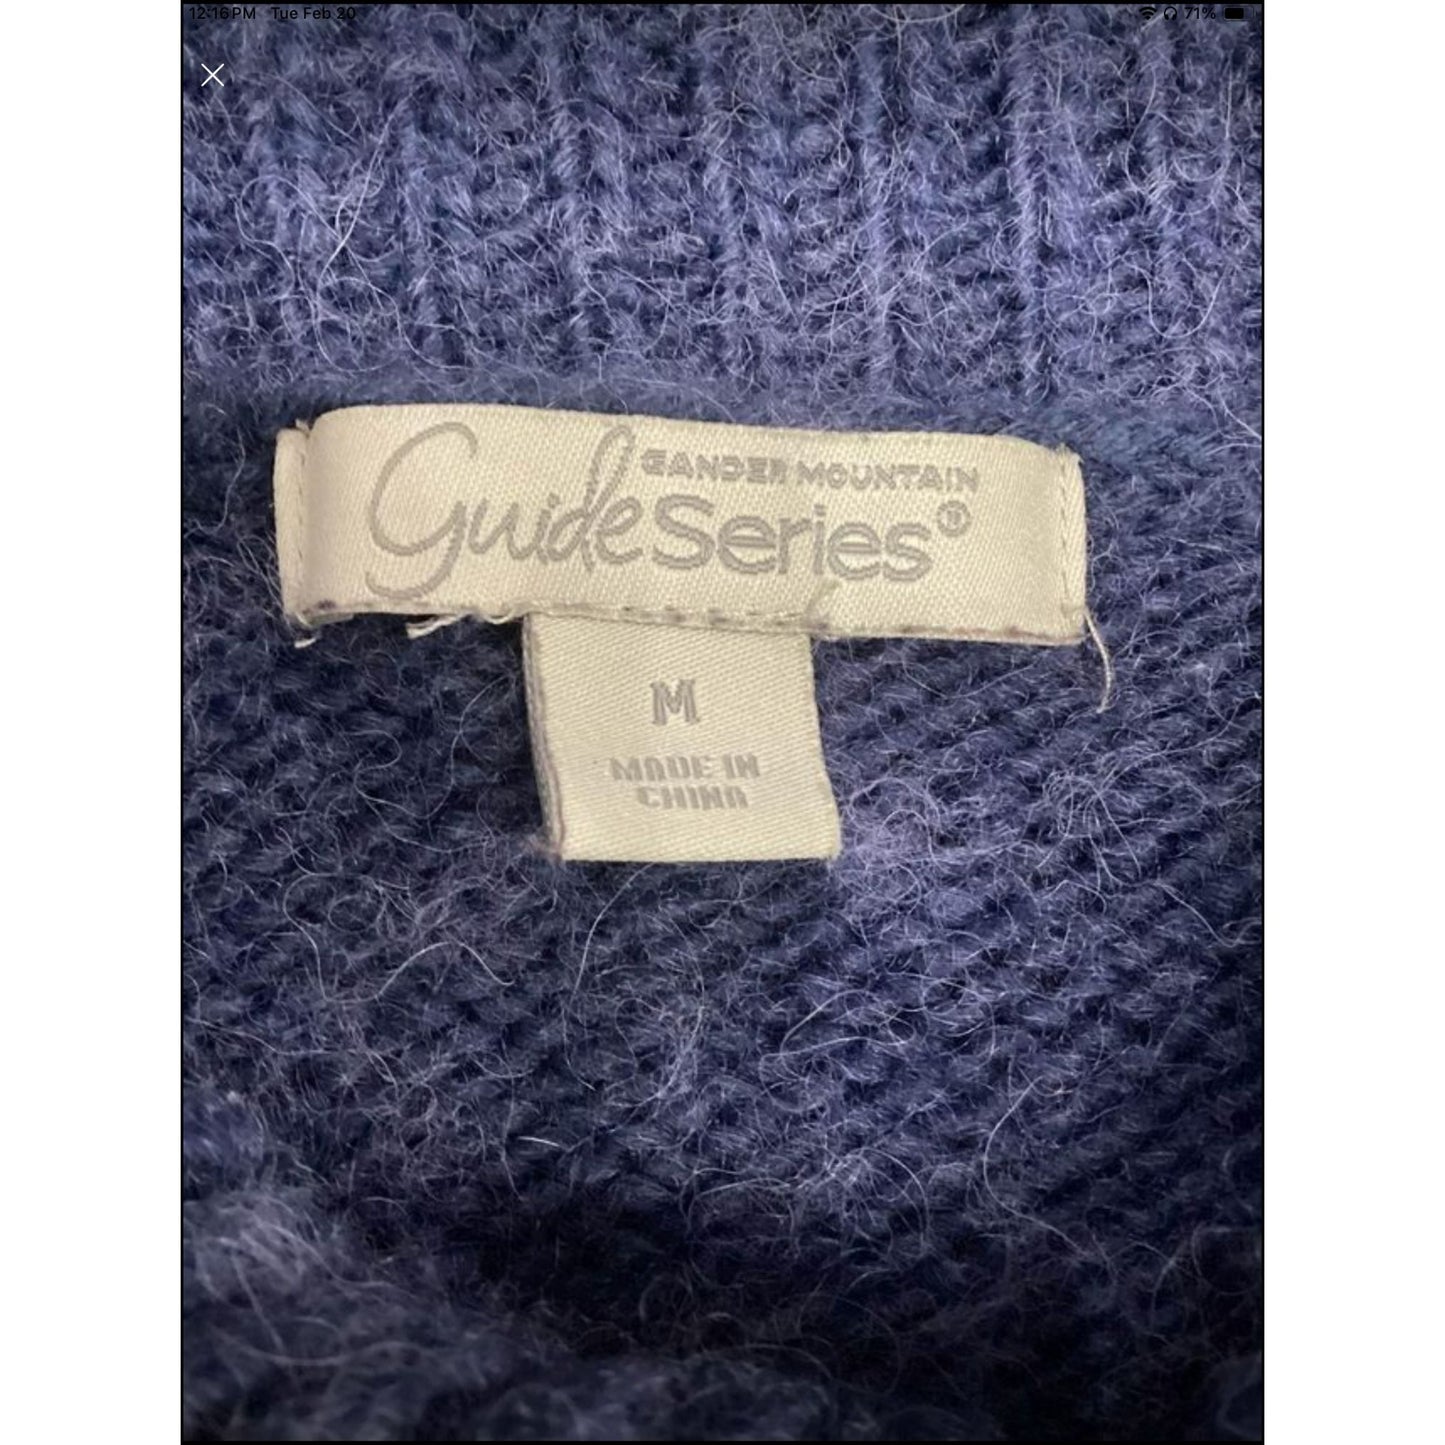 Womens Guide Series Chunky Sweater